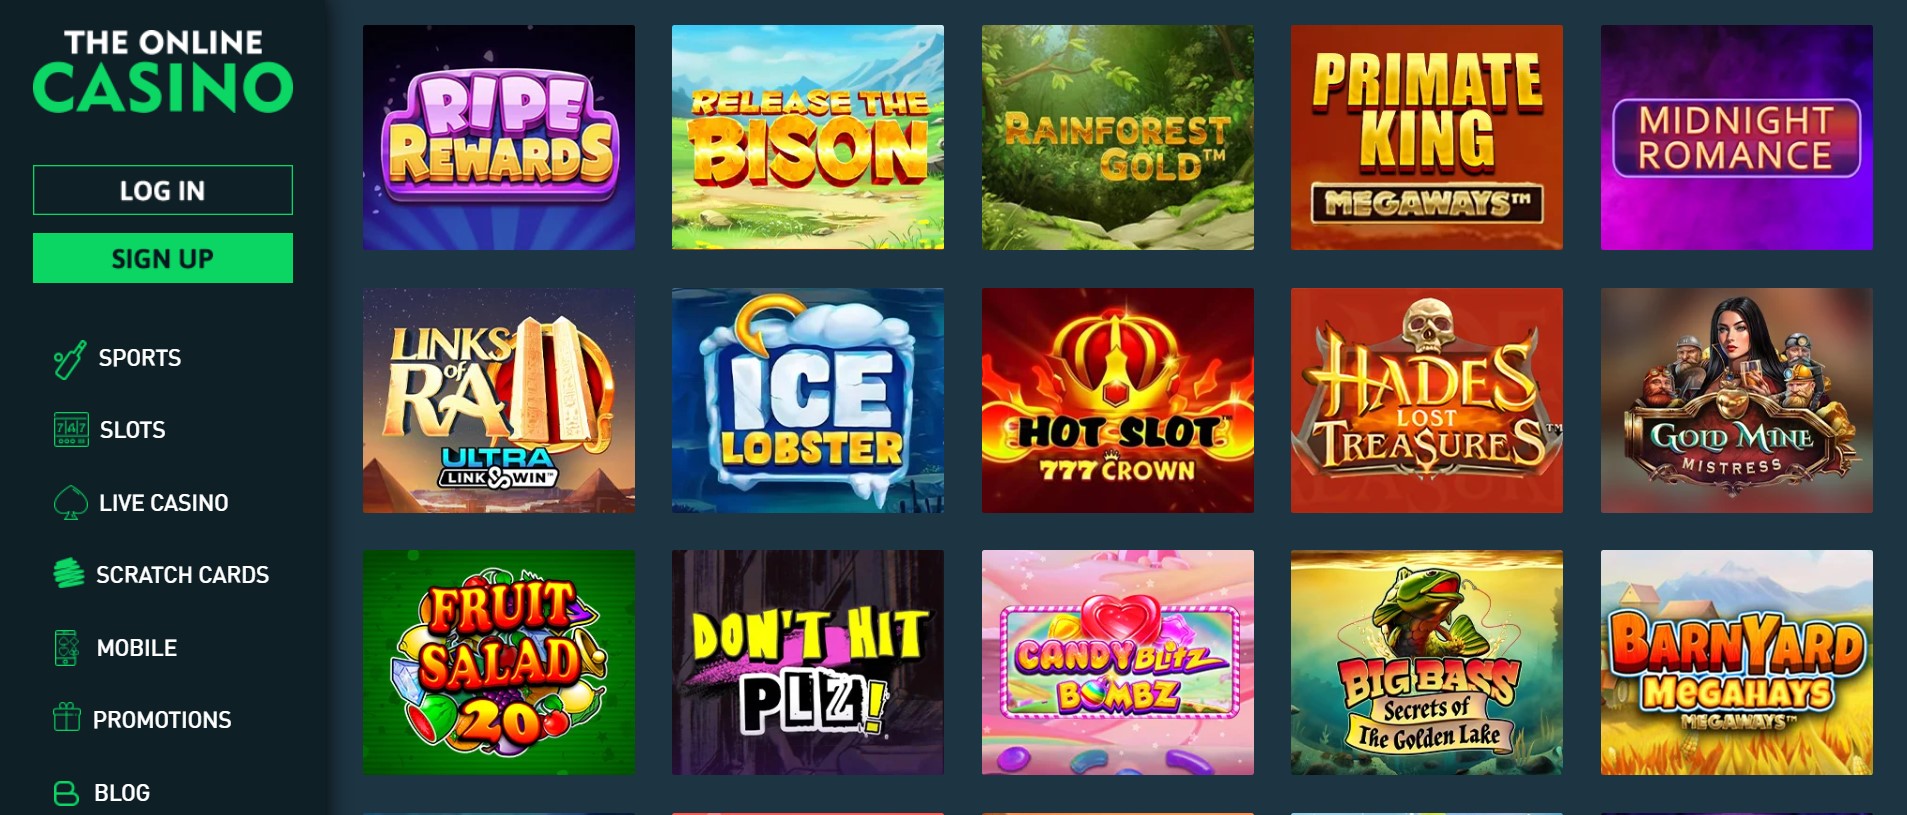 The Online Casino Games Review